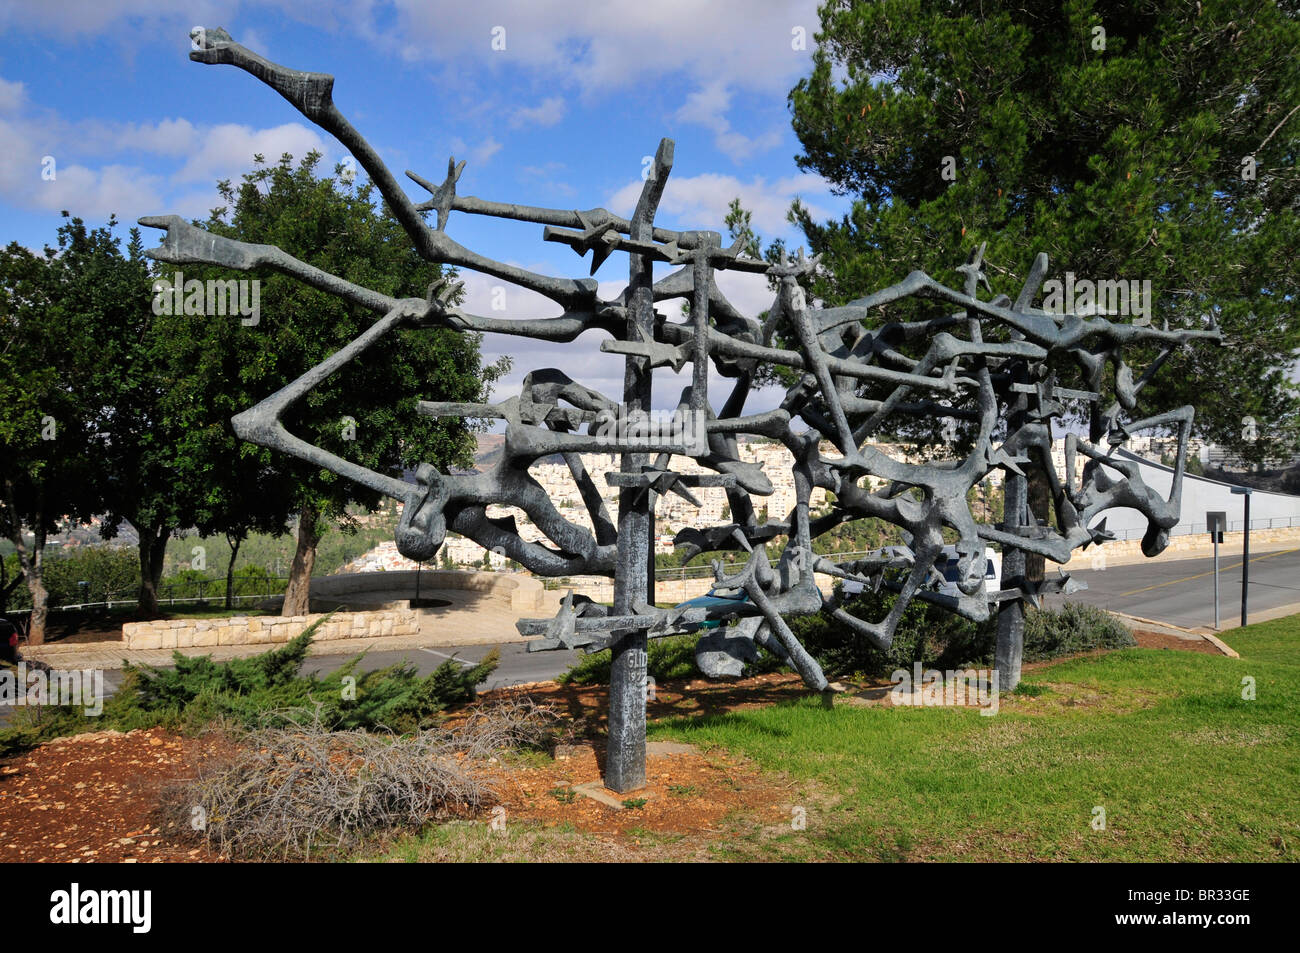 Holocaust cenotaph within the Holocaust memorial place Yad Vashem, Jerusalem, Israel, Middle East, the Orient Stock Photo